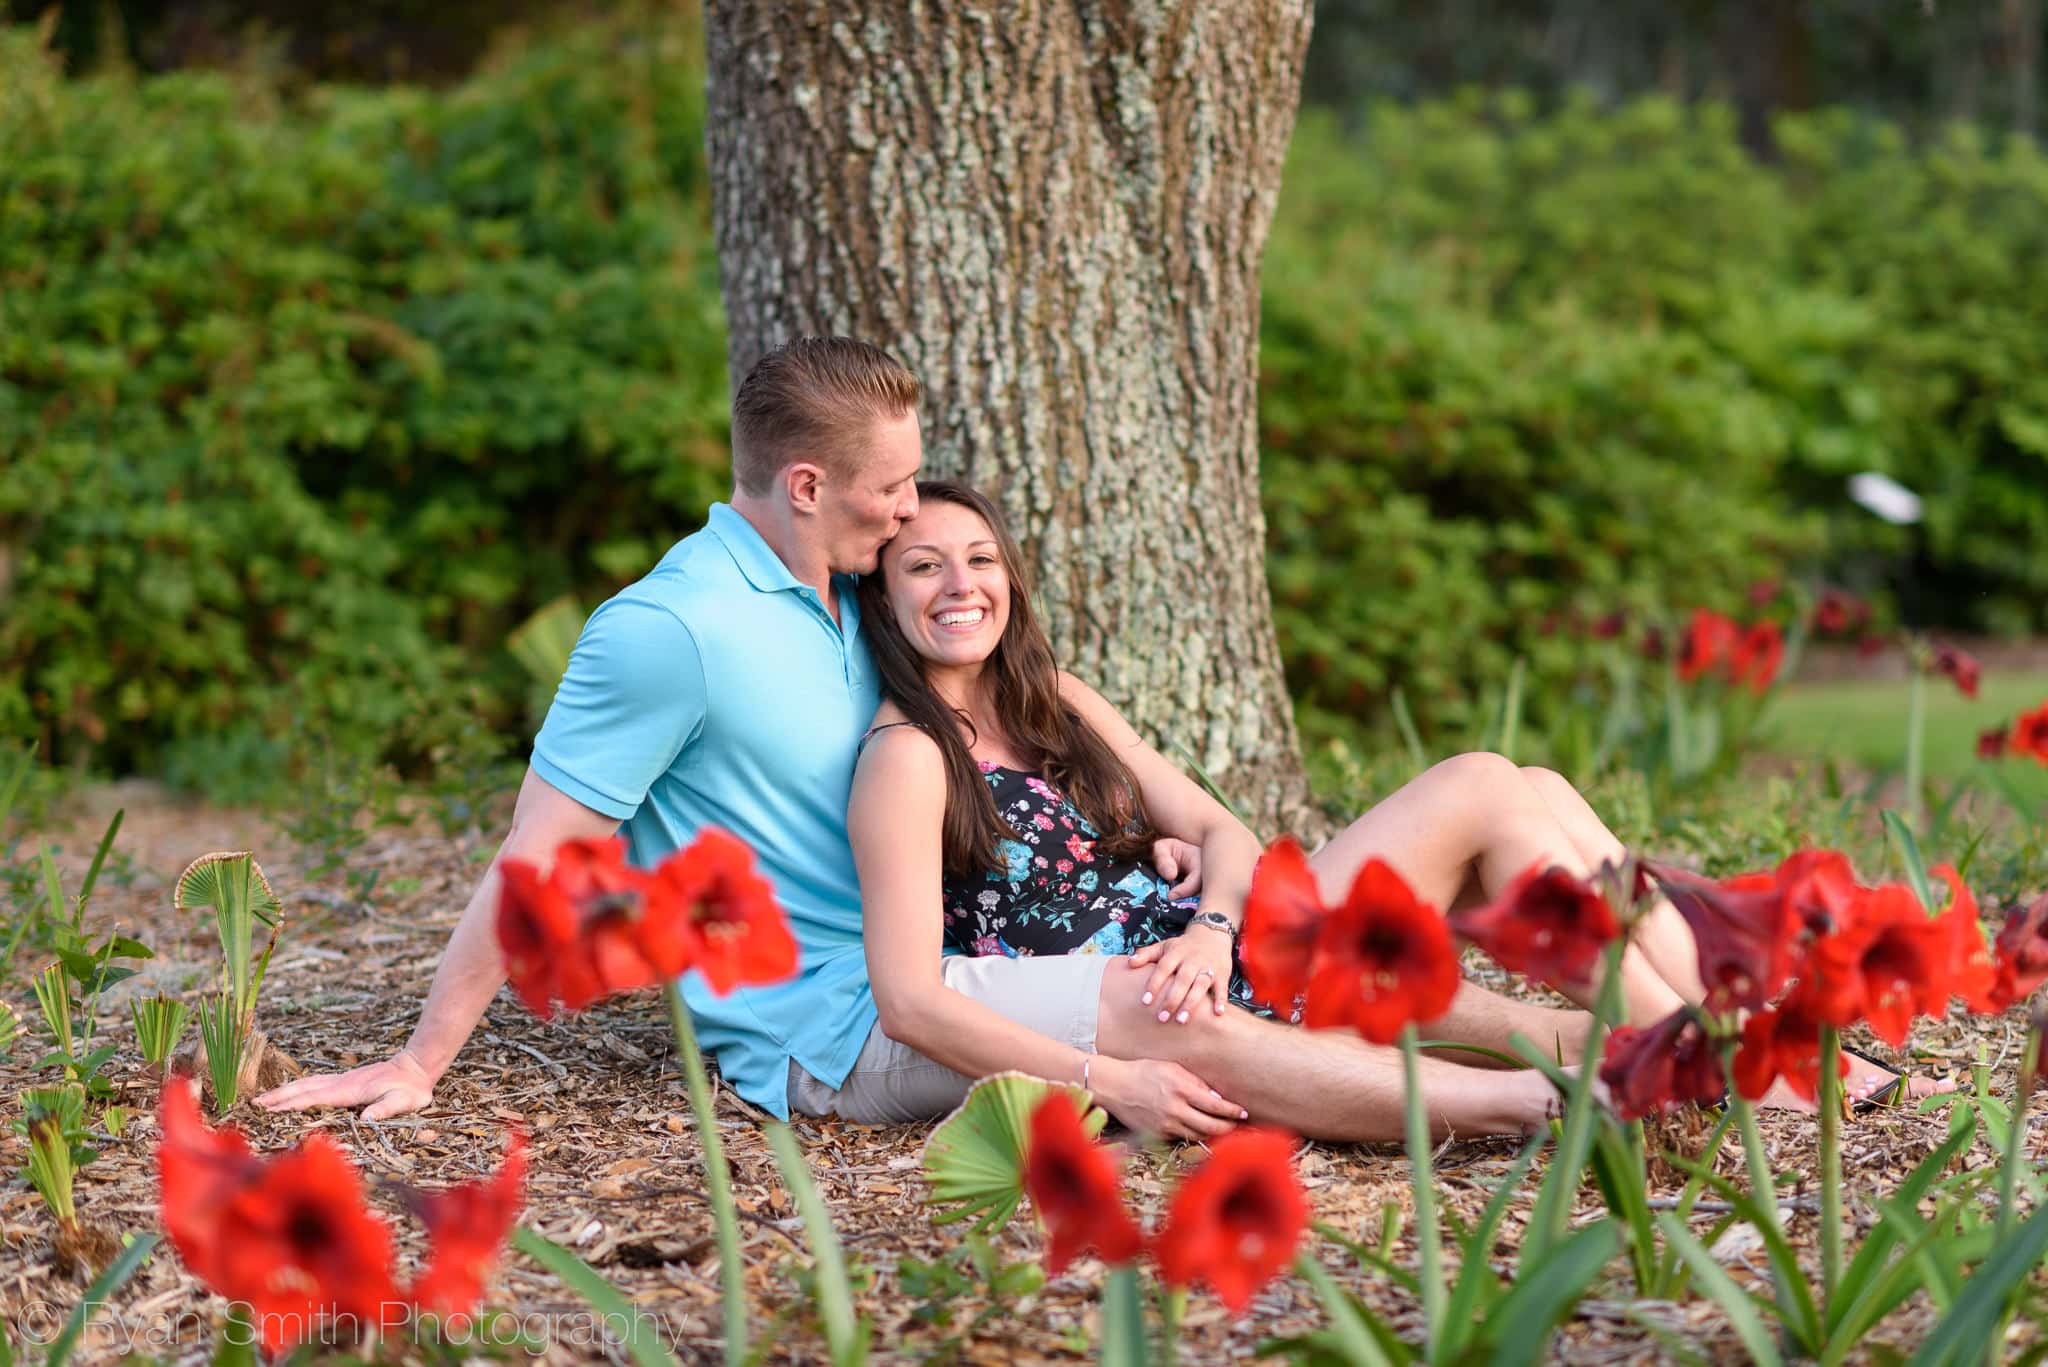 Kiss on the head behind the flowers - Brookgreen Gardens